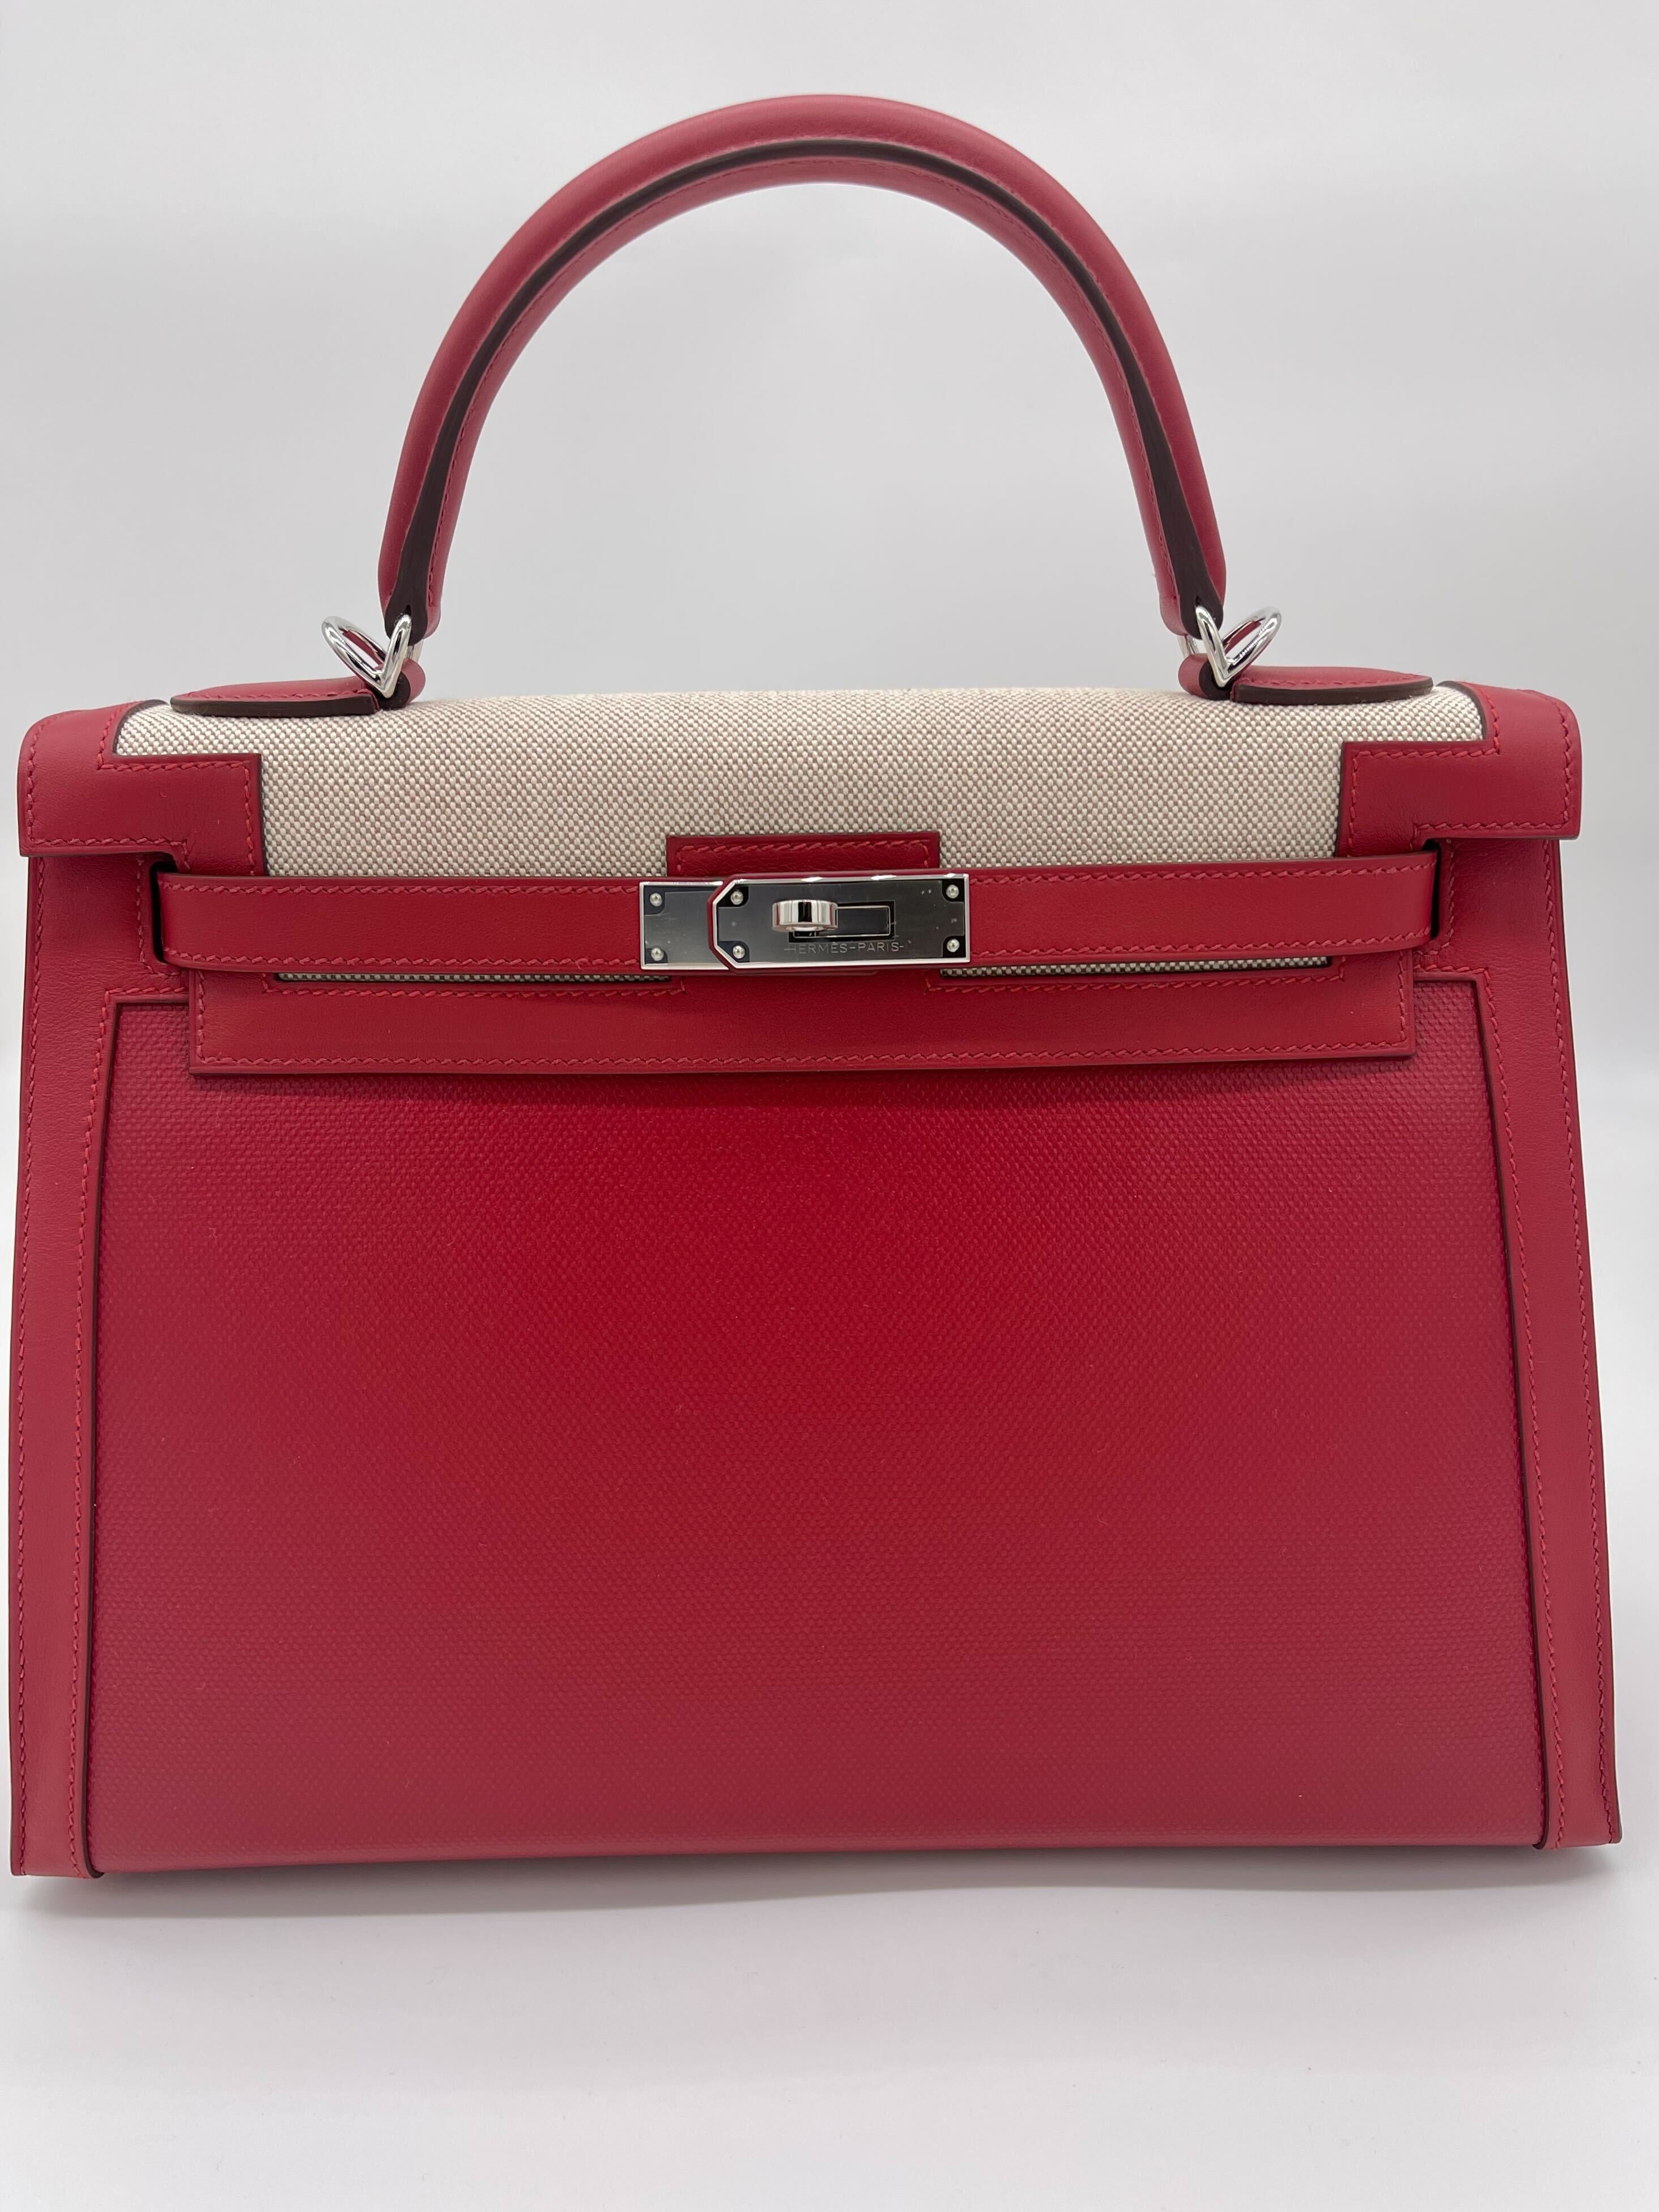 Hermes Kelly 32 Sellier Rouge Piment Swift and Toile Berline Palladium Hardware